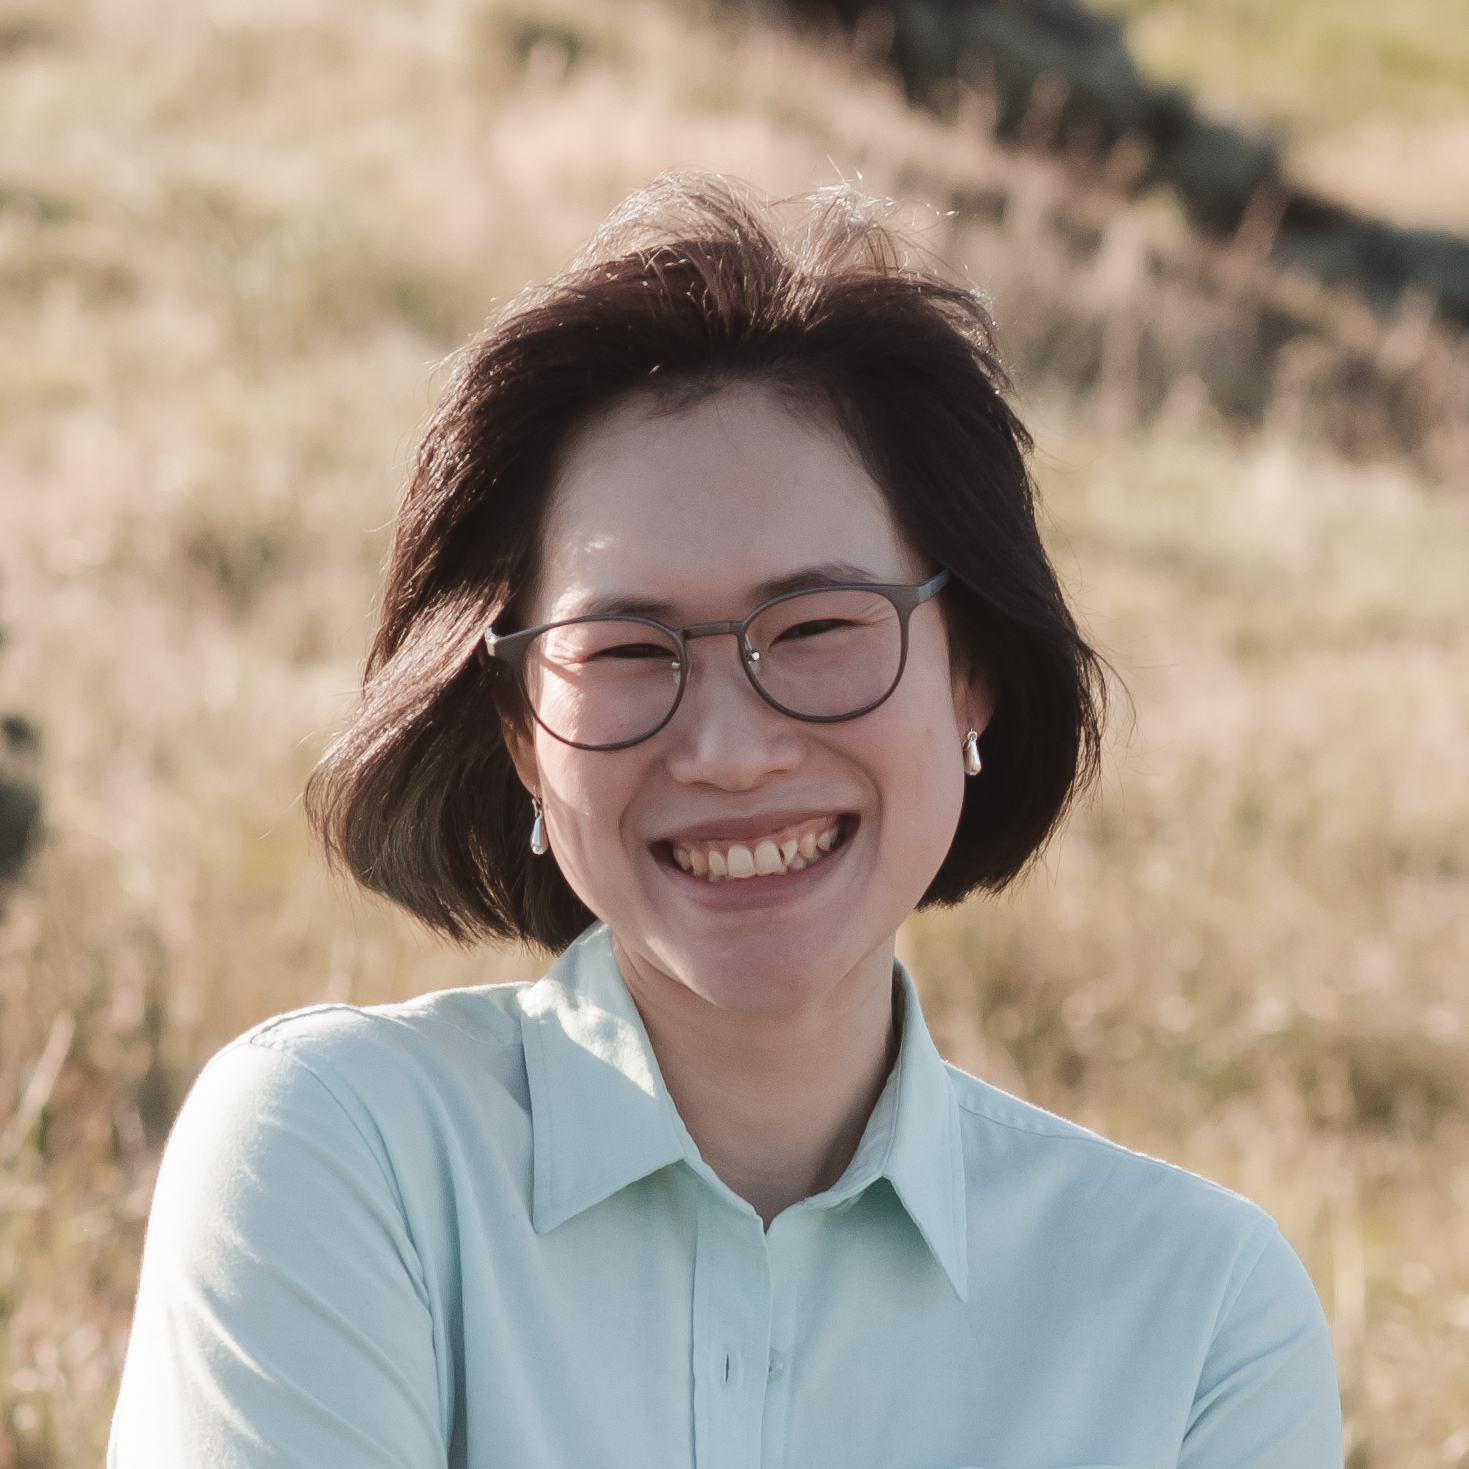 Headshot of Prae smiling widely at the camera. She's wearing a big pair of glasses and a mint green shirt. Her short black hair is fluttering in the wind, and there's a golden plain behind her